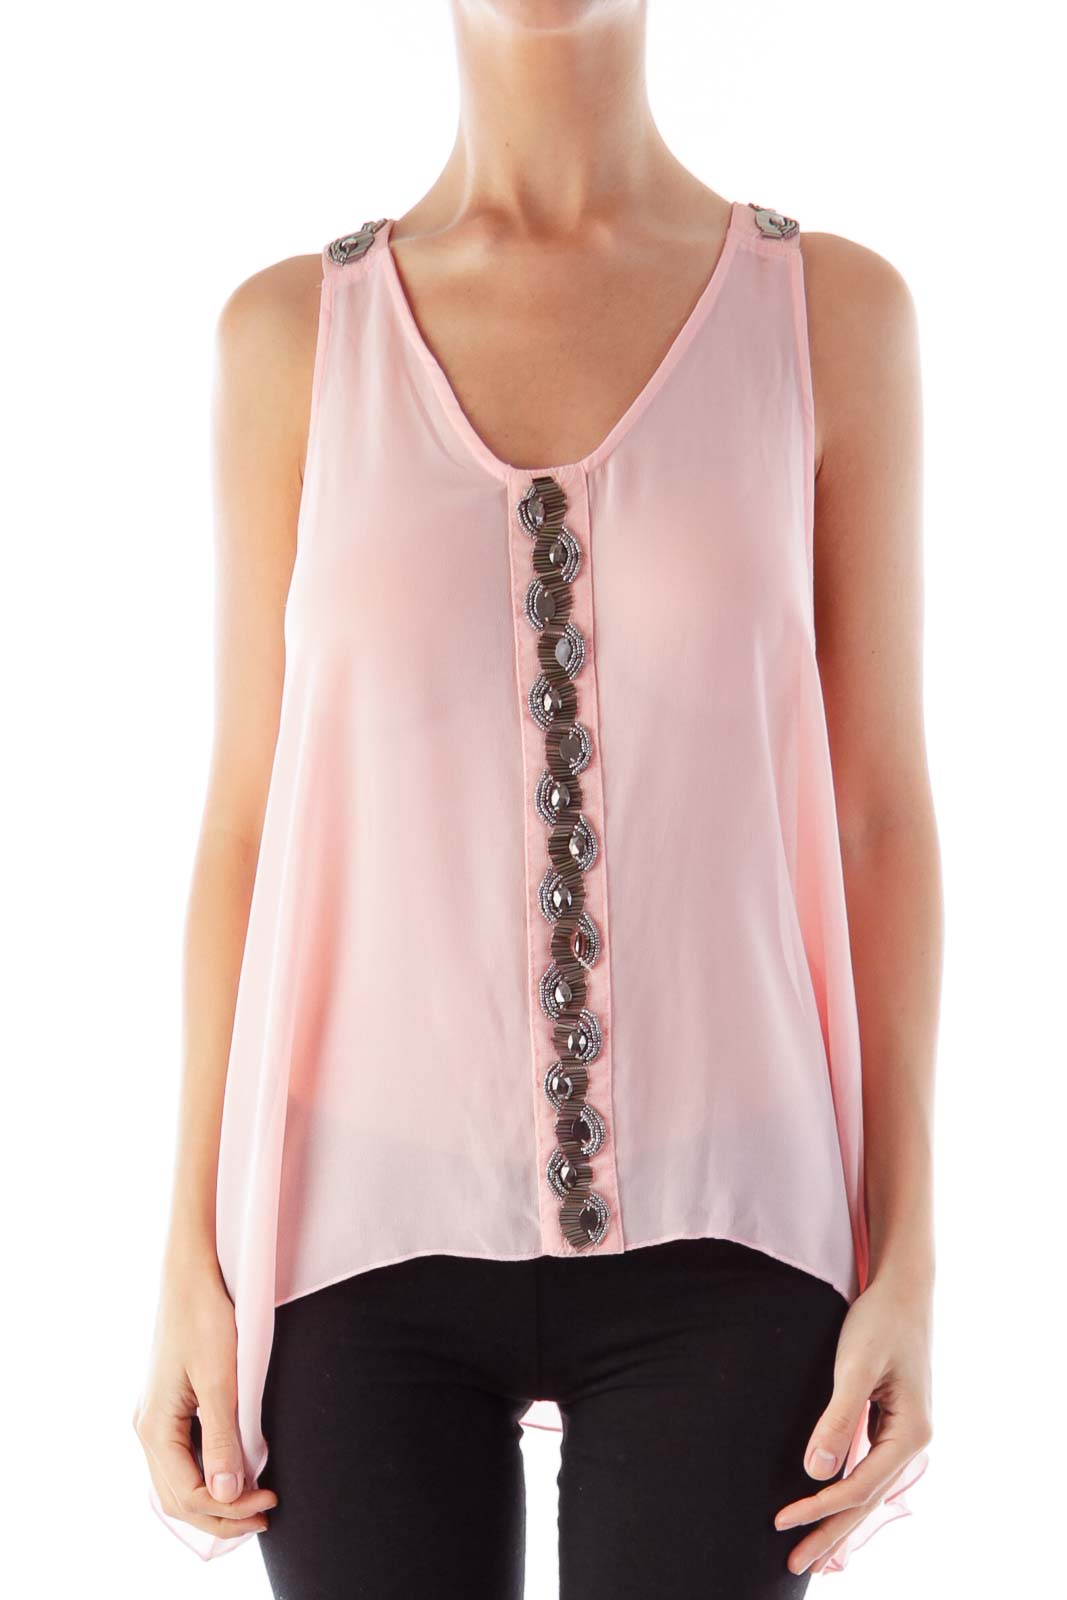 Peach Embroider Top Front